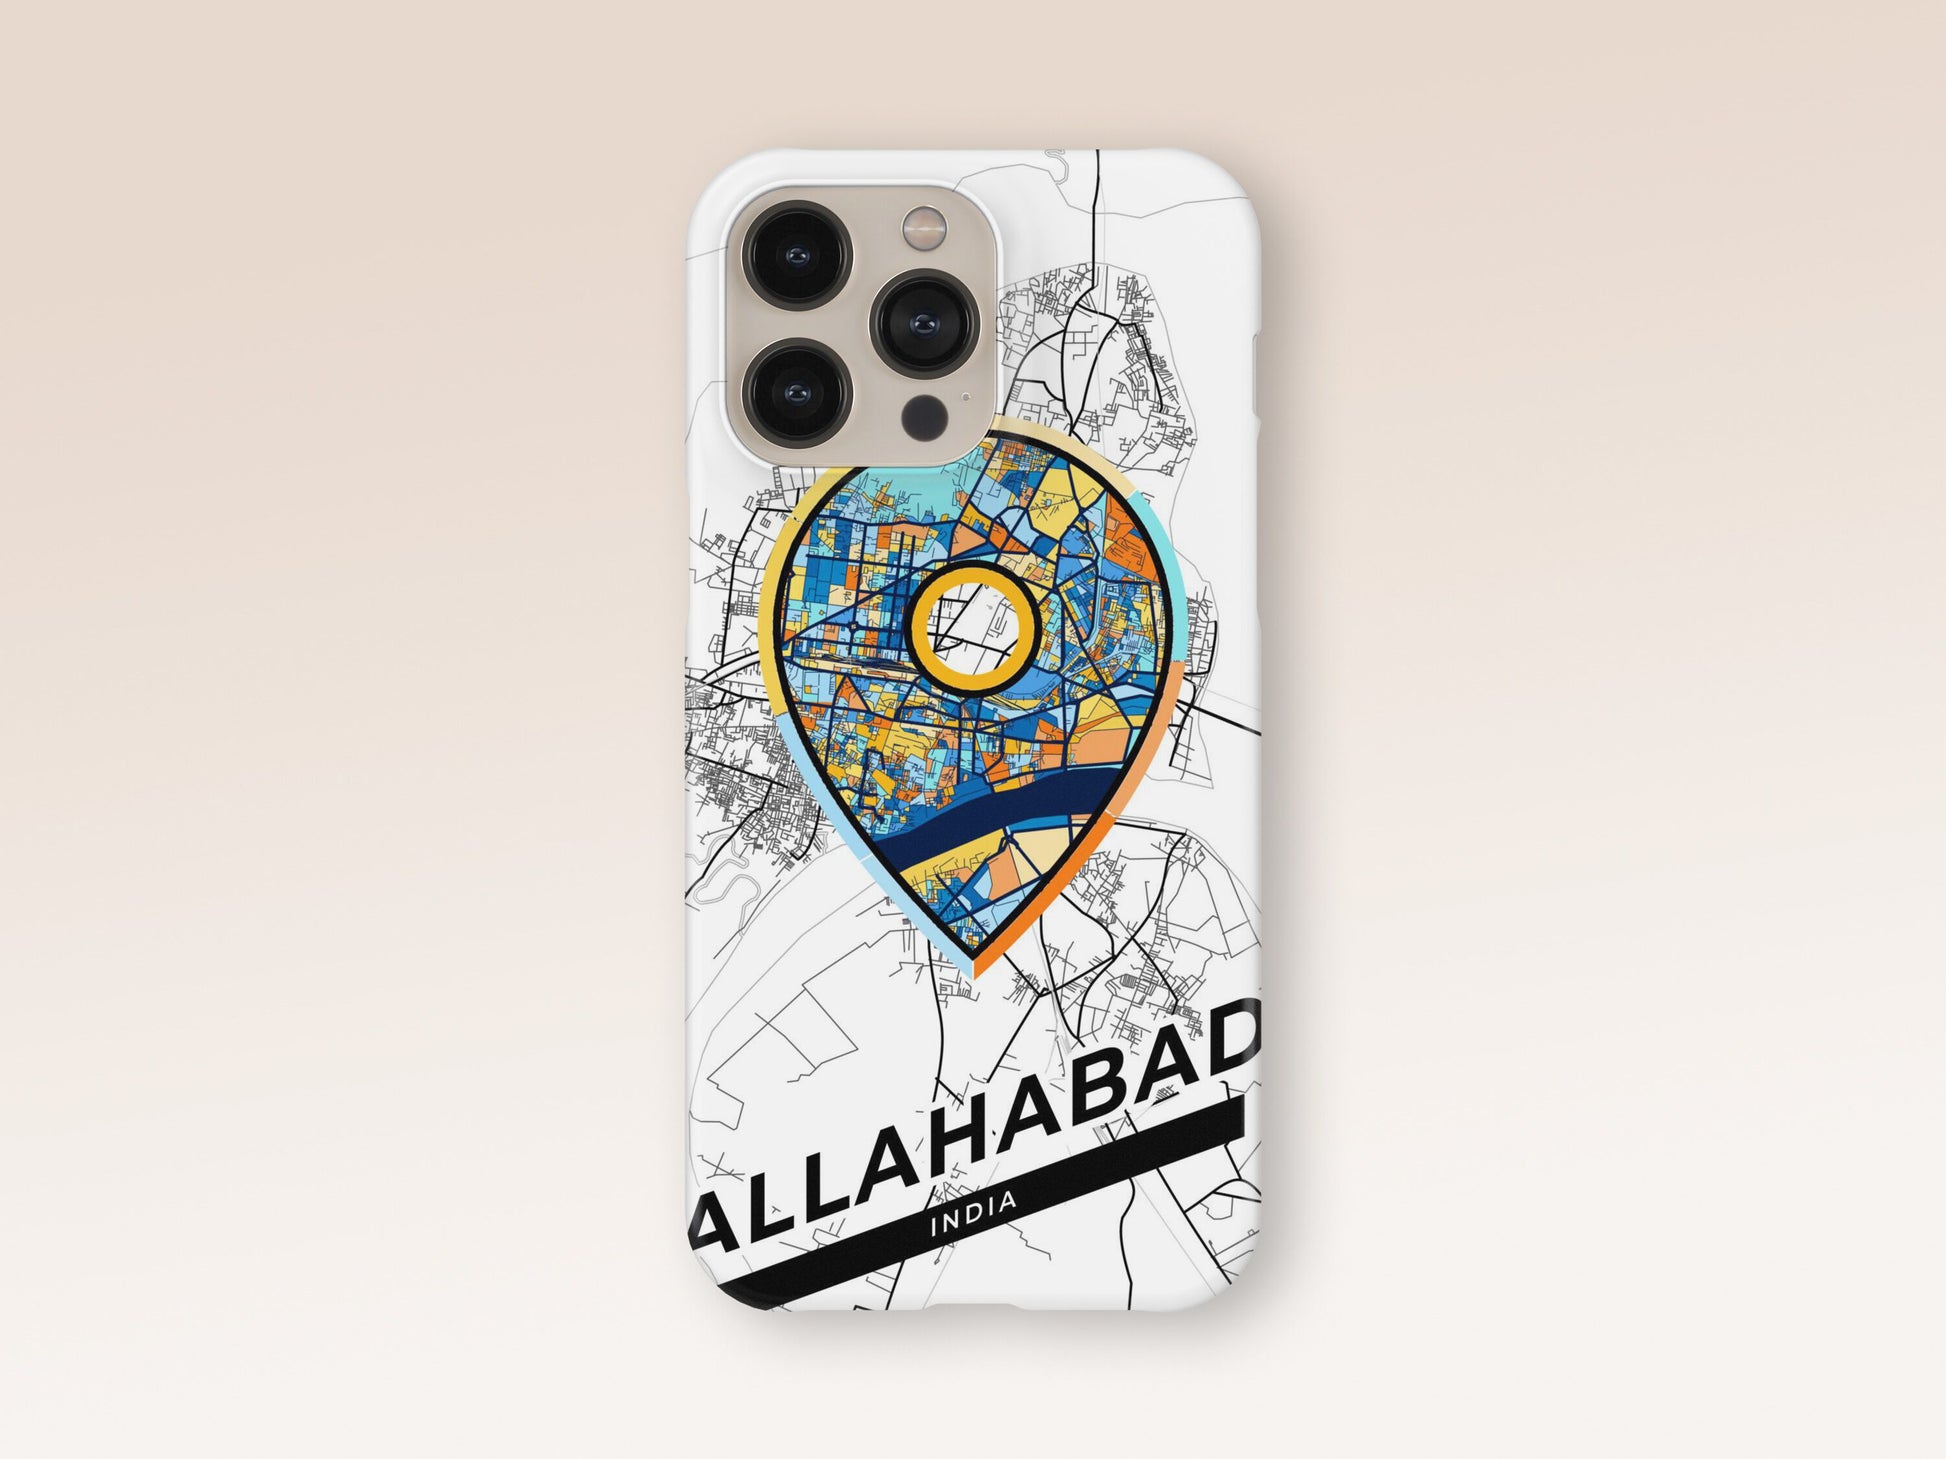 Allahabad India slim phone case with colorful icon. Birthday, wedding or housewarming gift. Couple match cases. 1